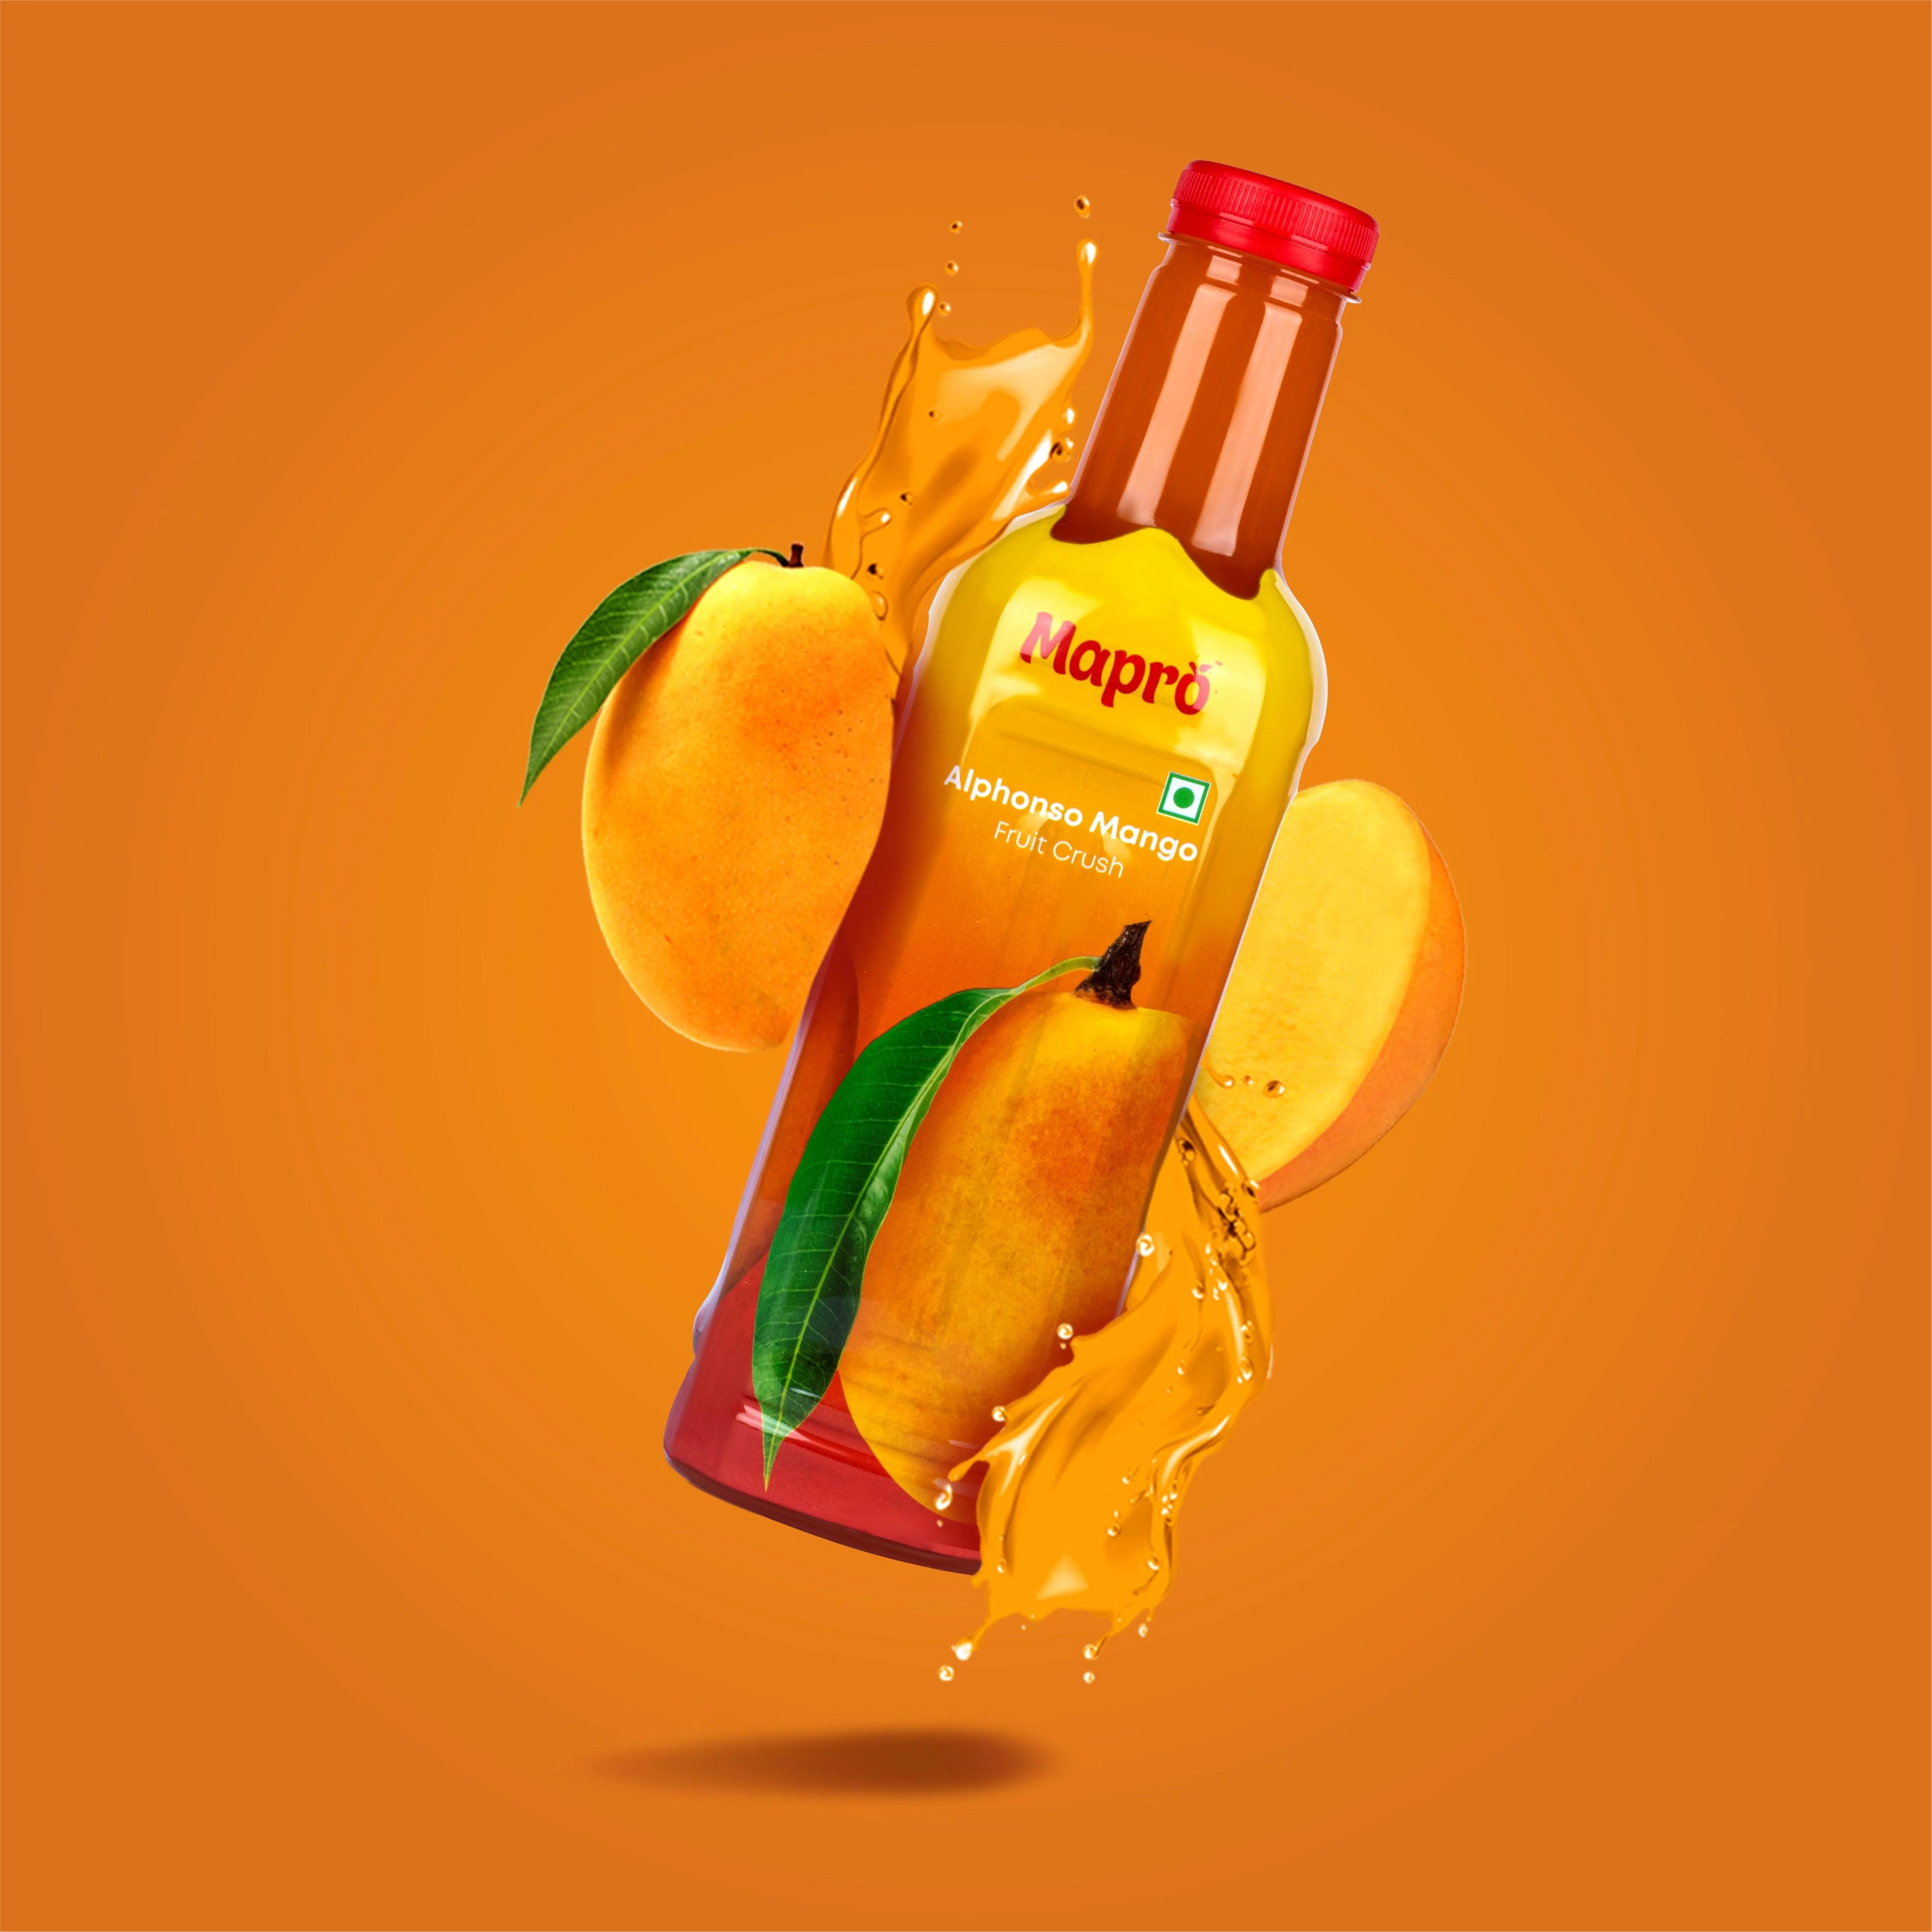 Alphonso Mango Crush Syrup (Concentrate) by Mapro, 750 ML